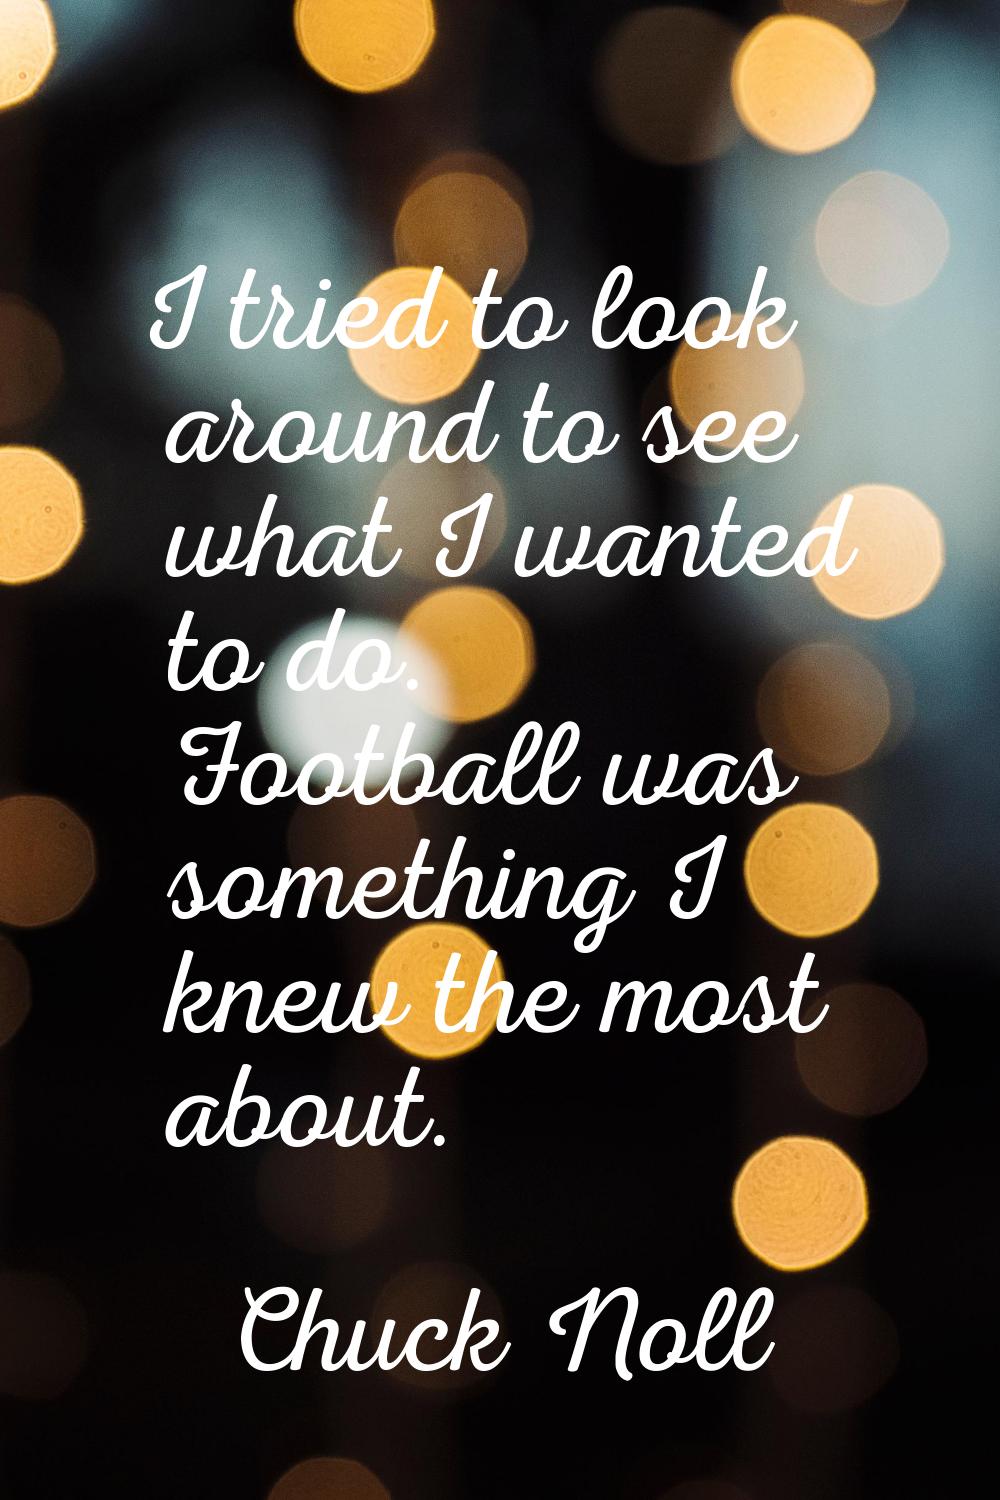 I tried to look around to see what I wanted to do. Football was something I knew the most about.